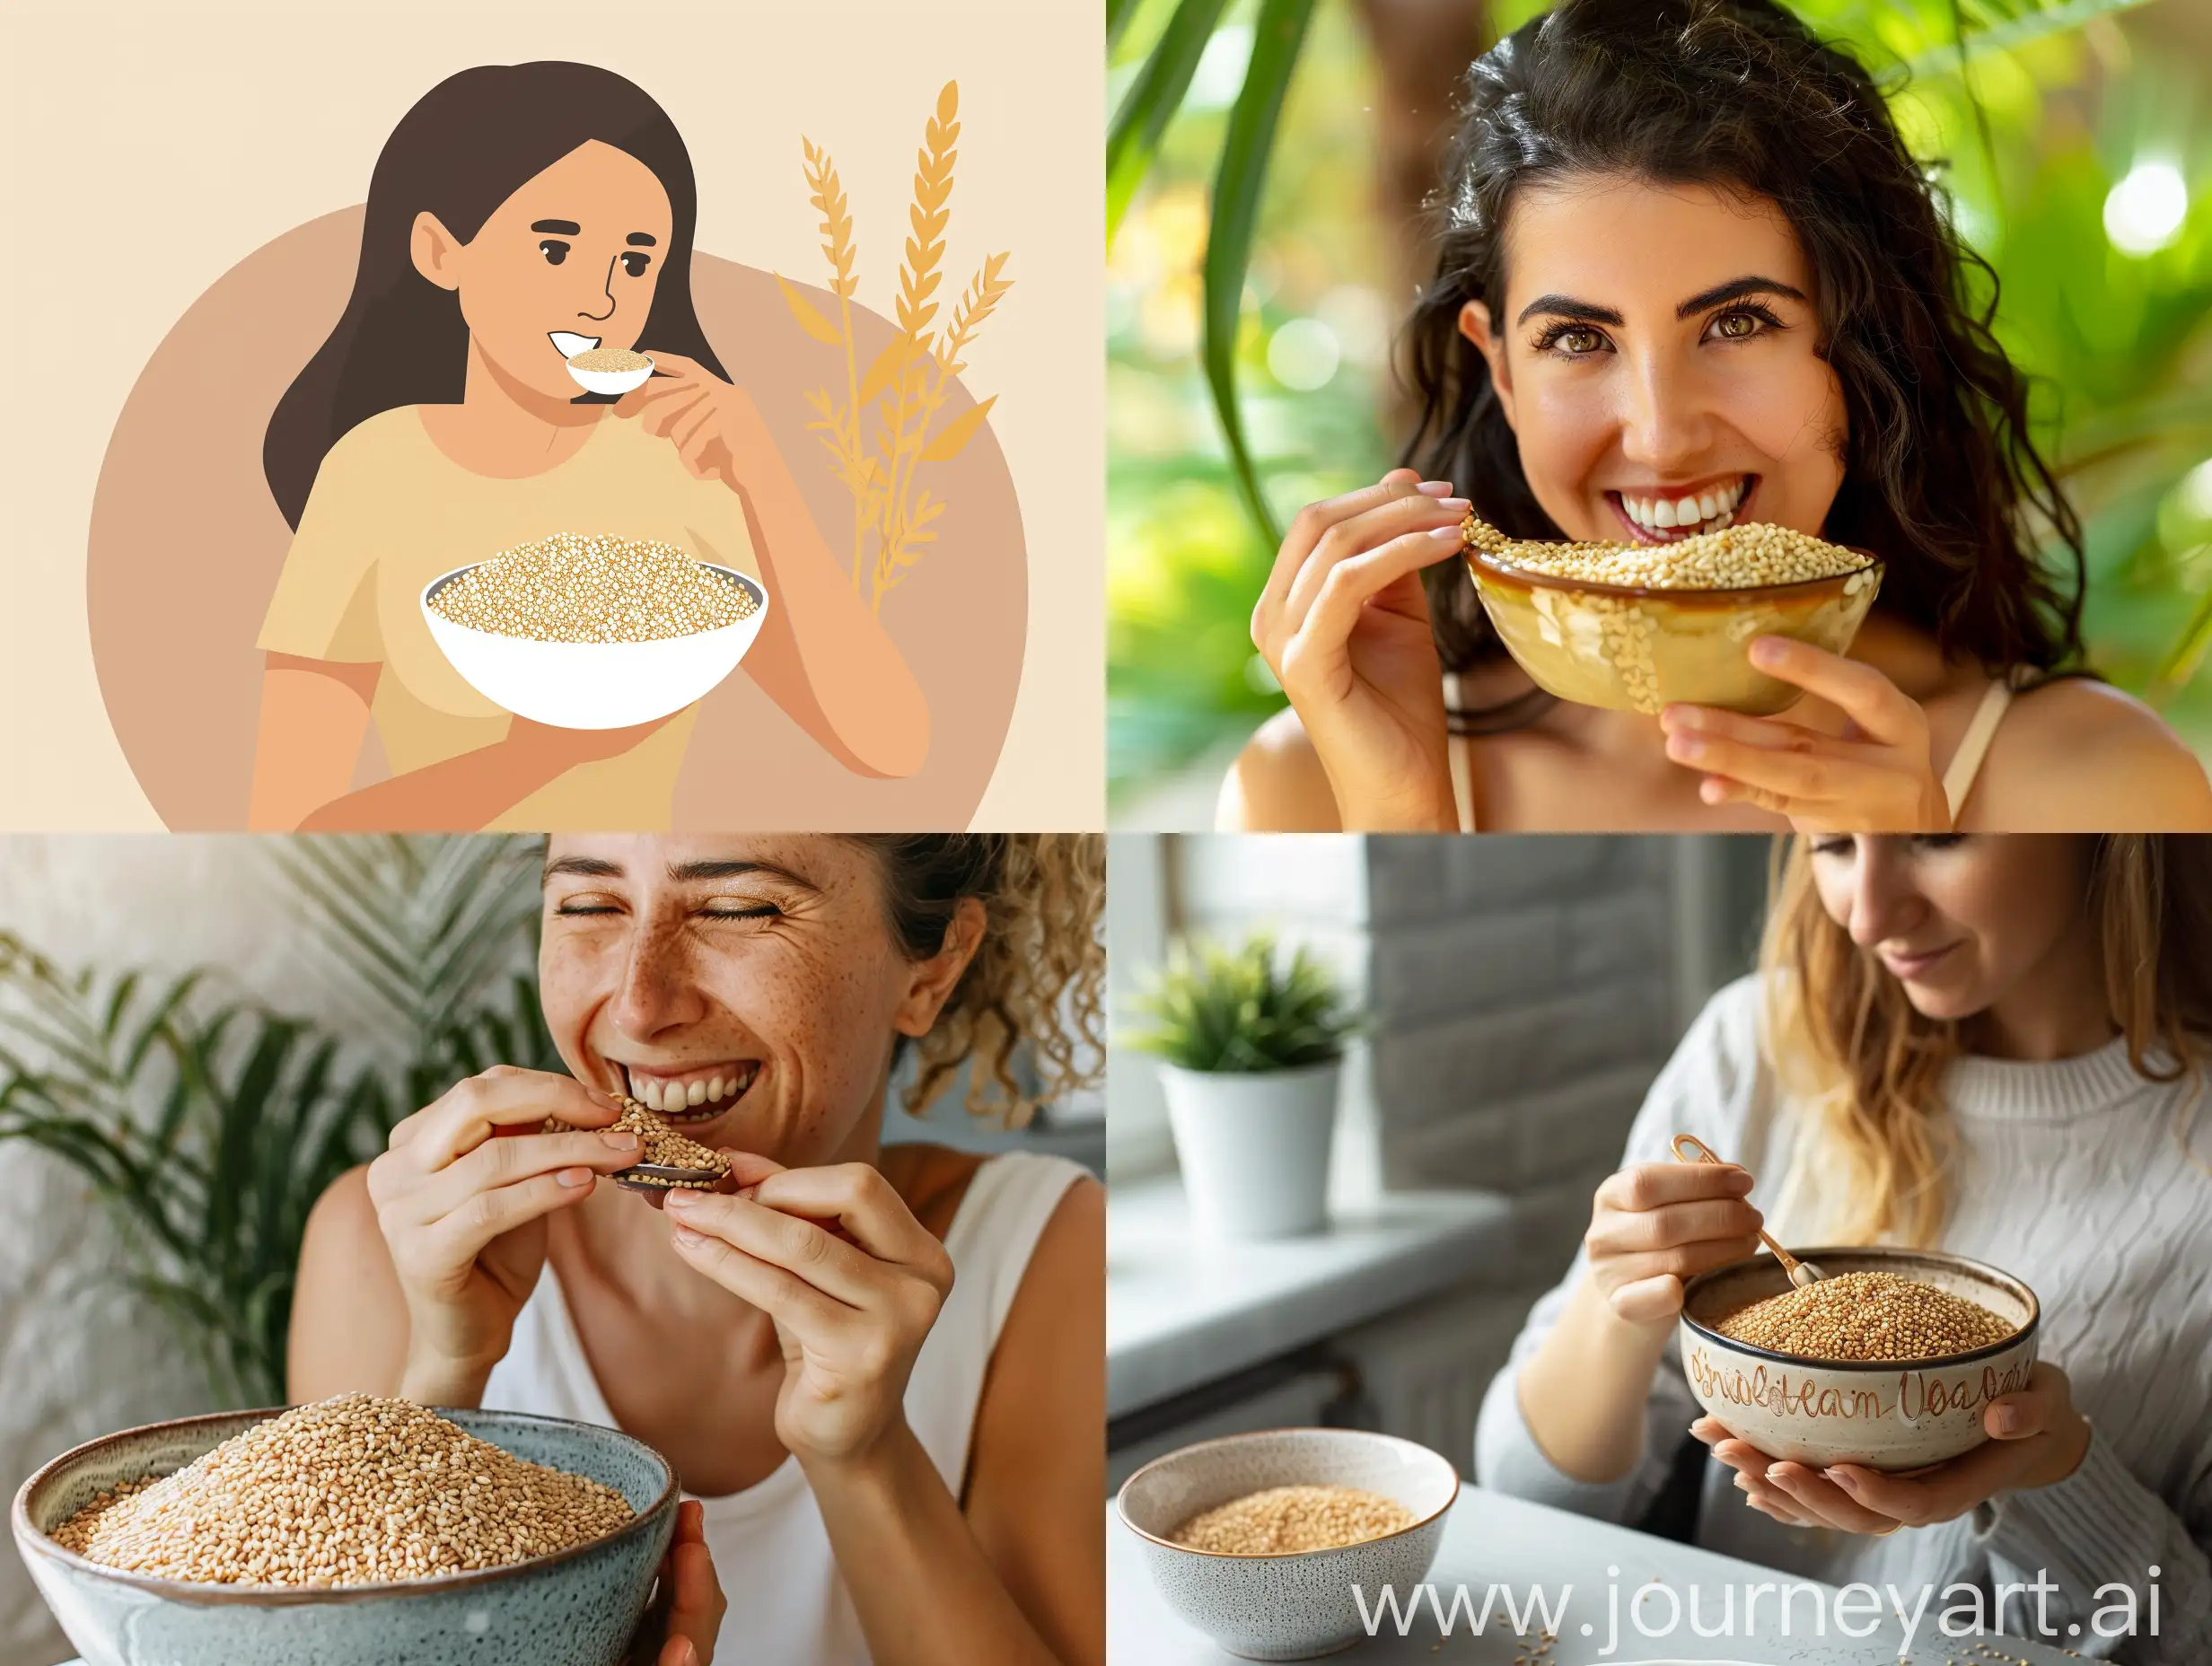 A picture of a woman eating a bowl of sesame seeds